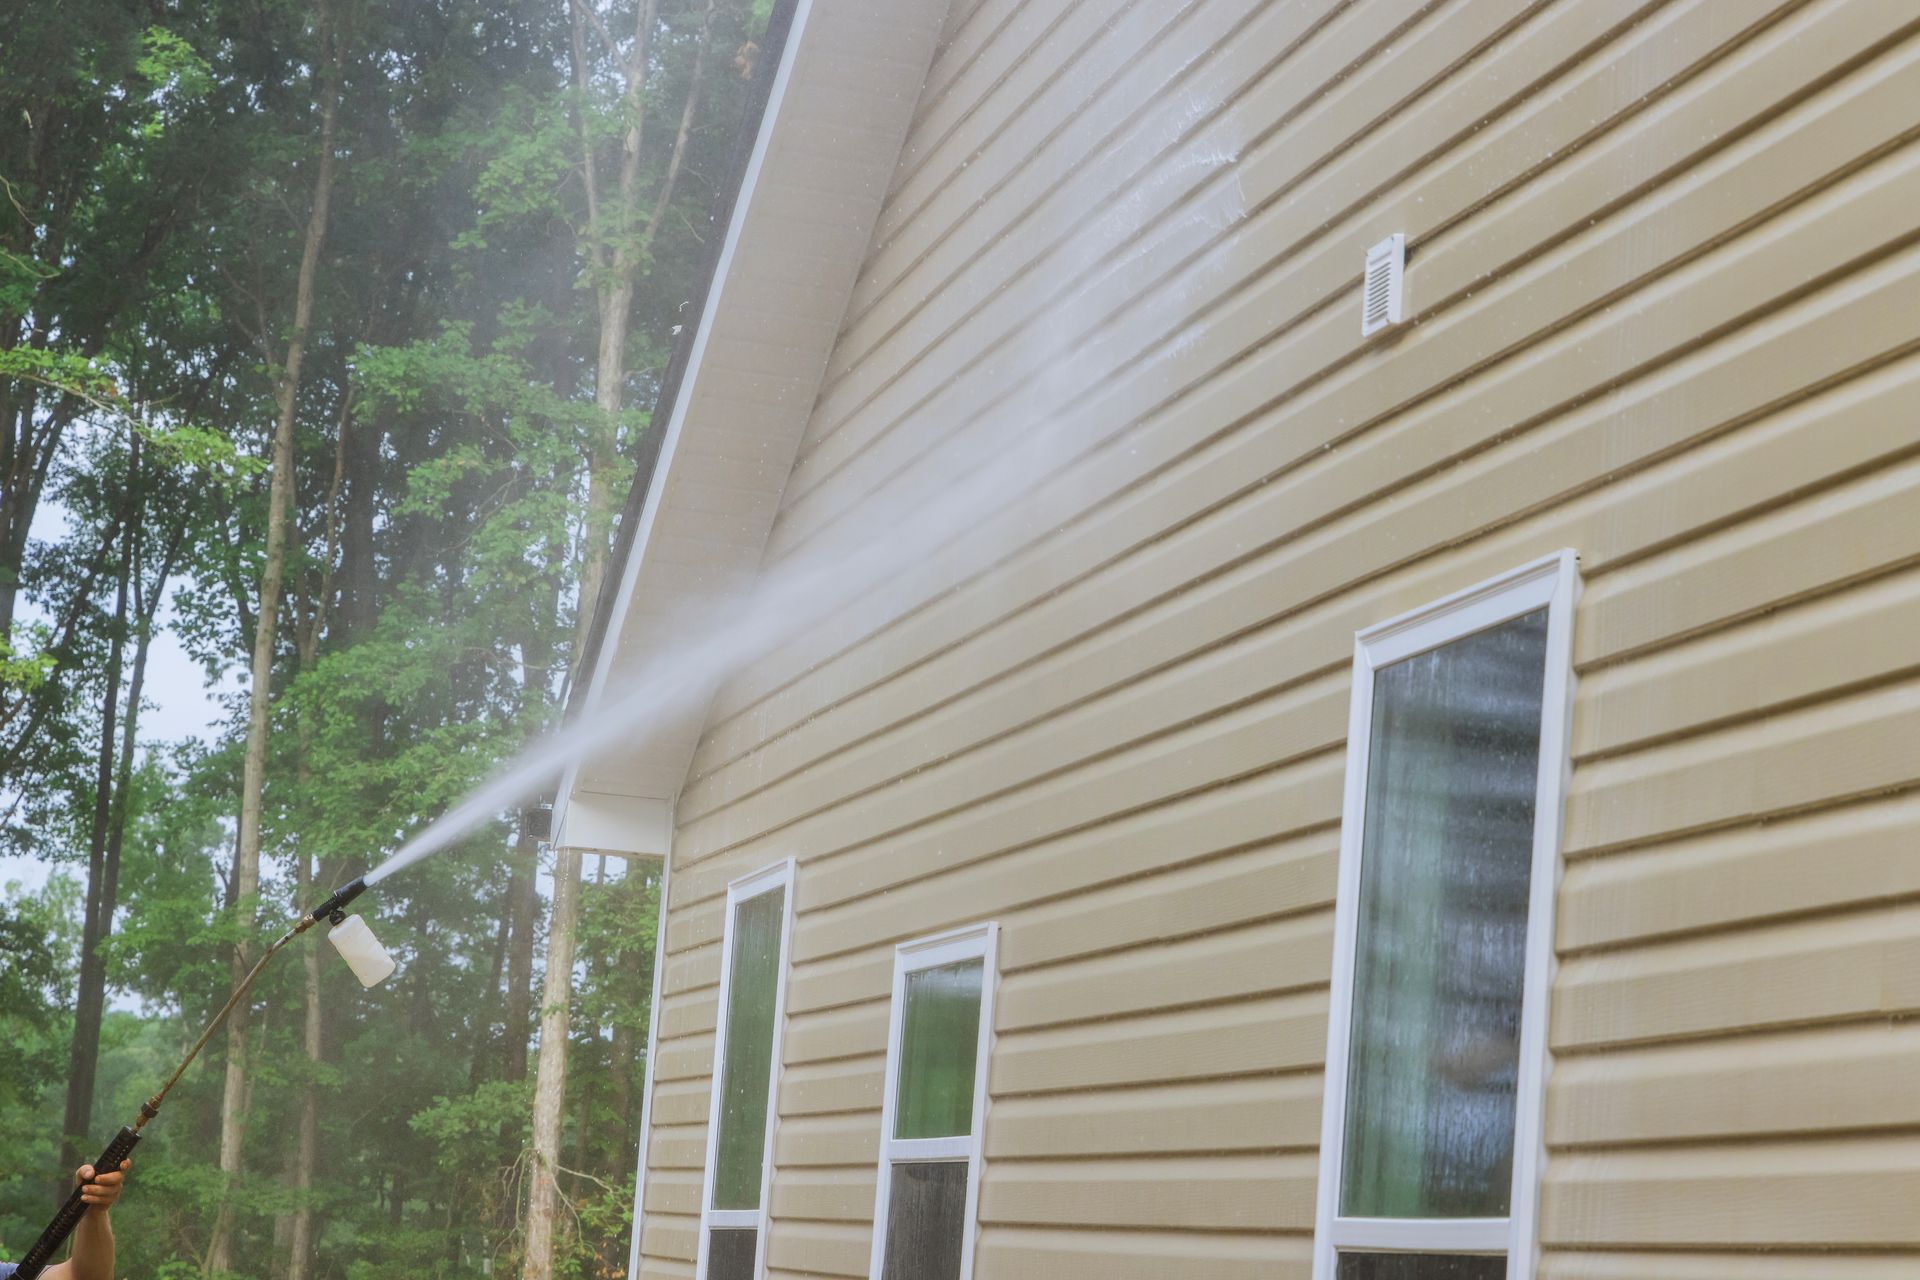 A man is using a high pressure washer to clean the side of a house.